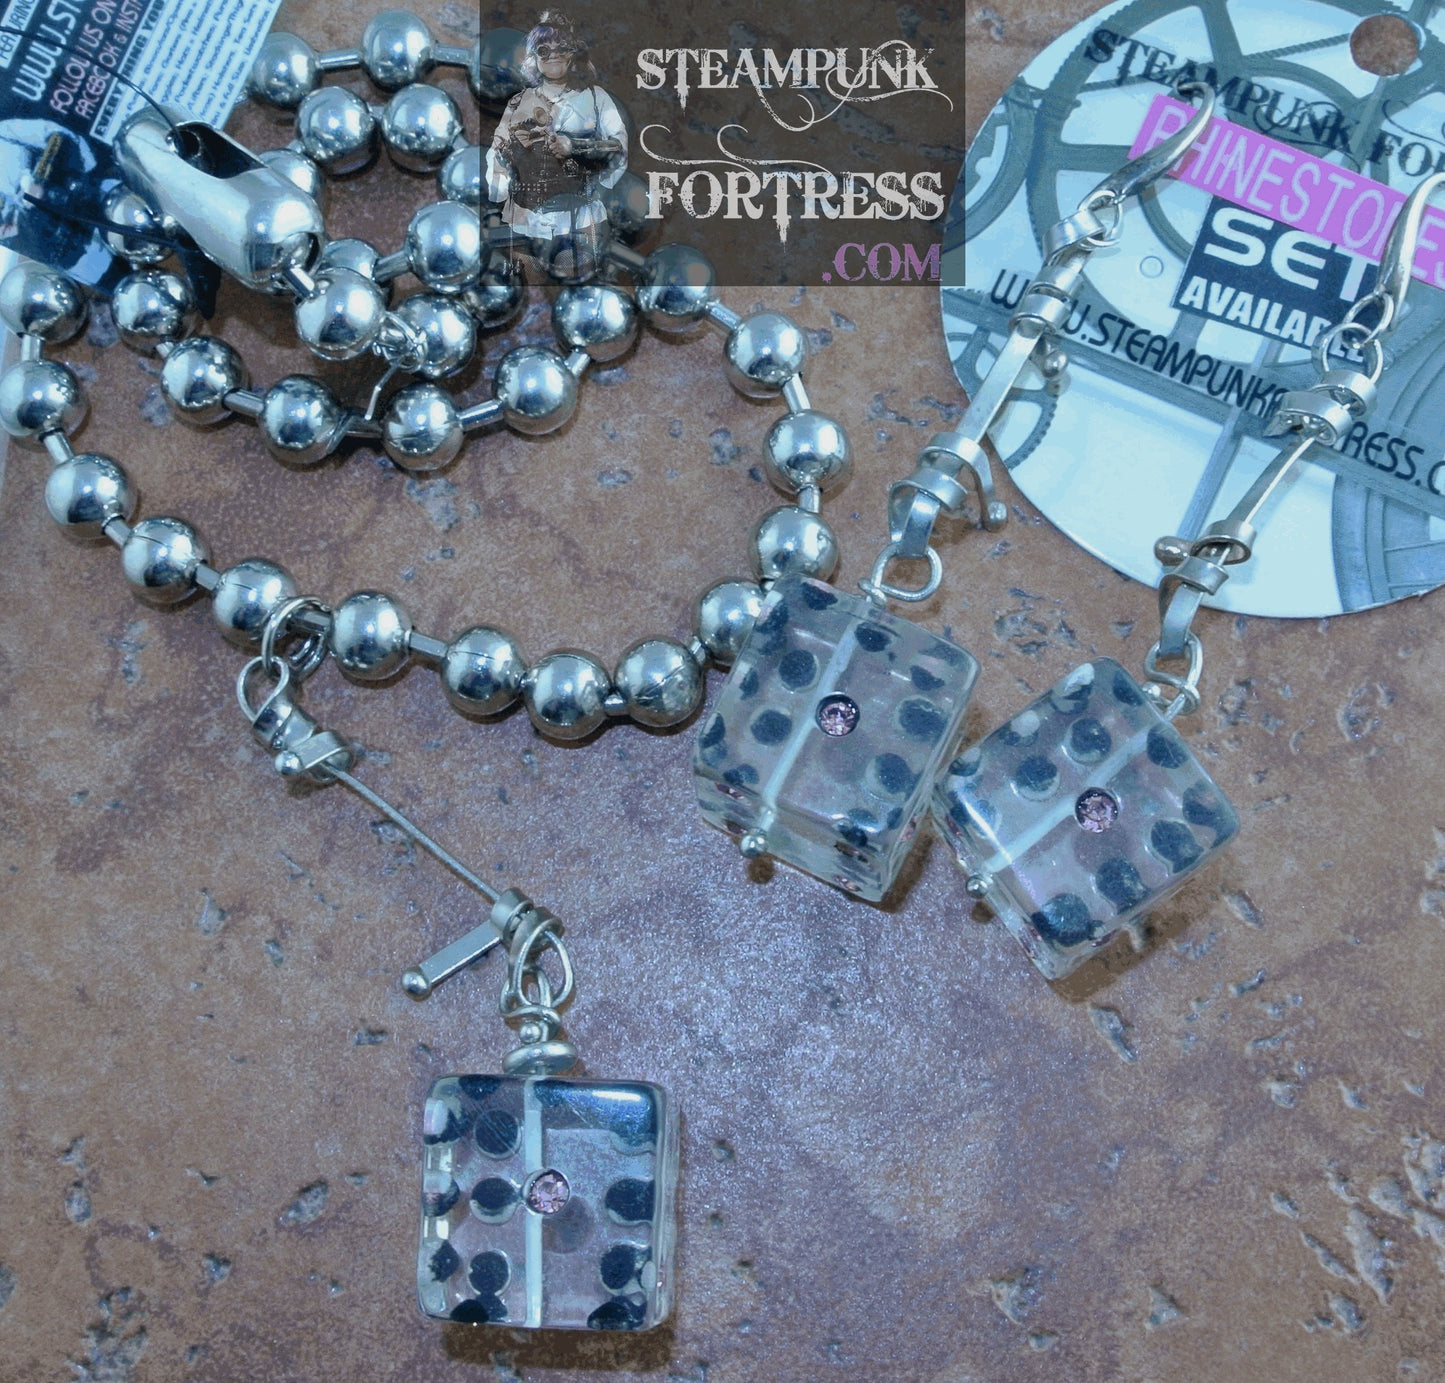 SILVER DICE LARGE CLEAR PINK RHINESTONES SILVER BALL CHAIN NECKLACE SET AVAILABLE STARR WILDE STEAMPUNK FORTRESS